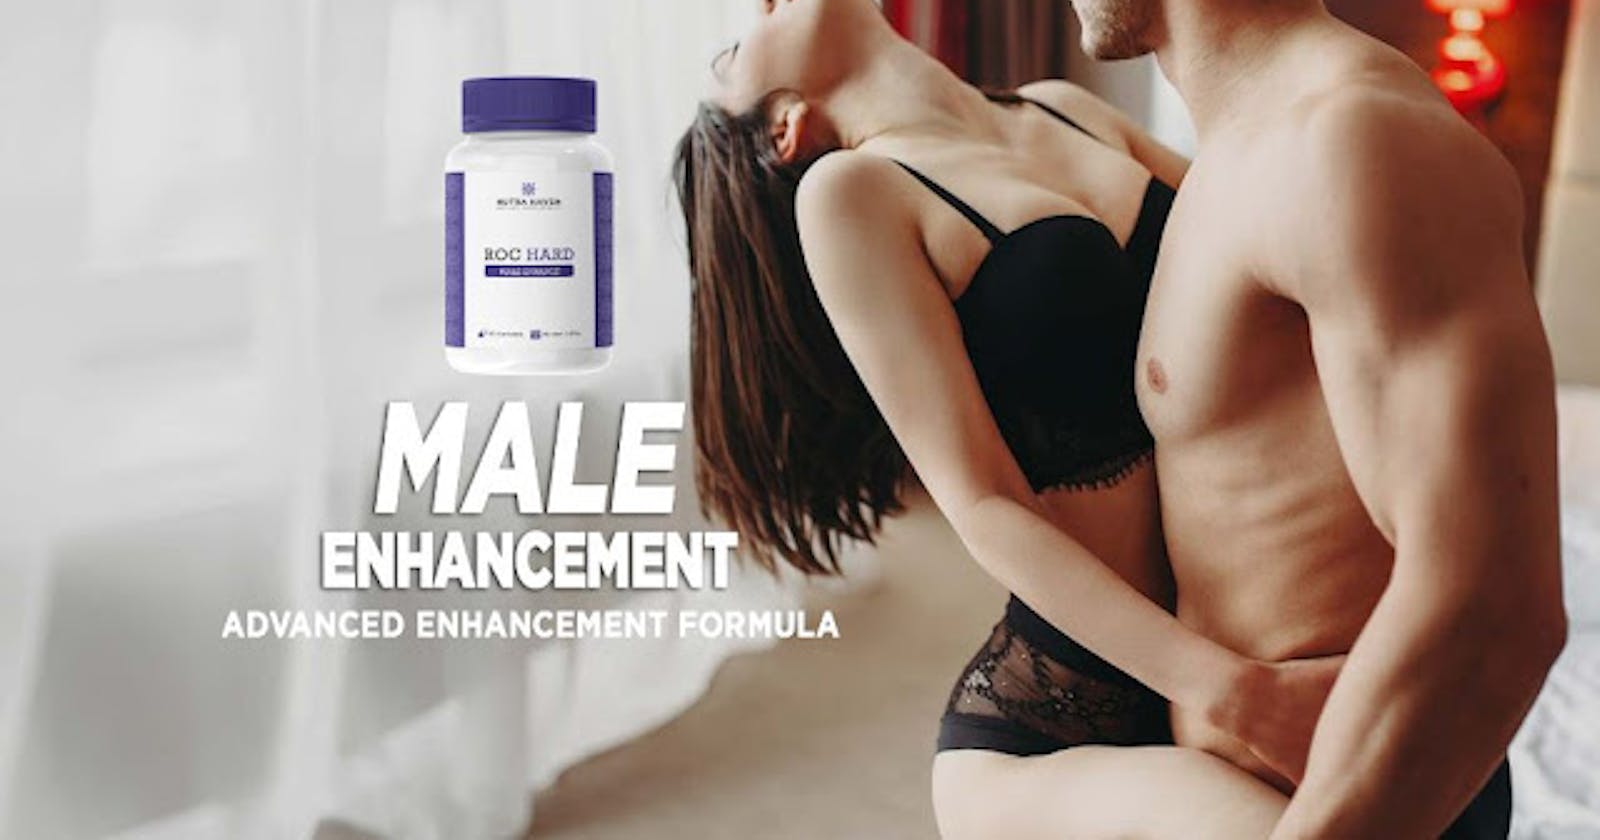 Roc Hard Male Enhancement Benefits, Results – Boost Stamina & Staying Power! Price & Buy